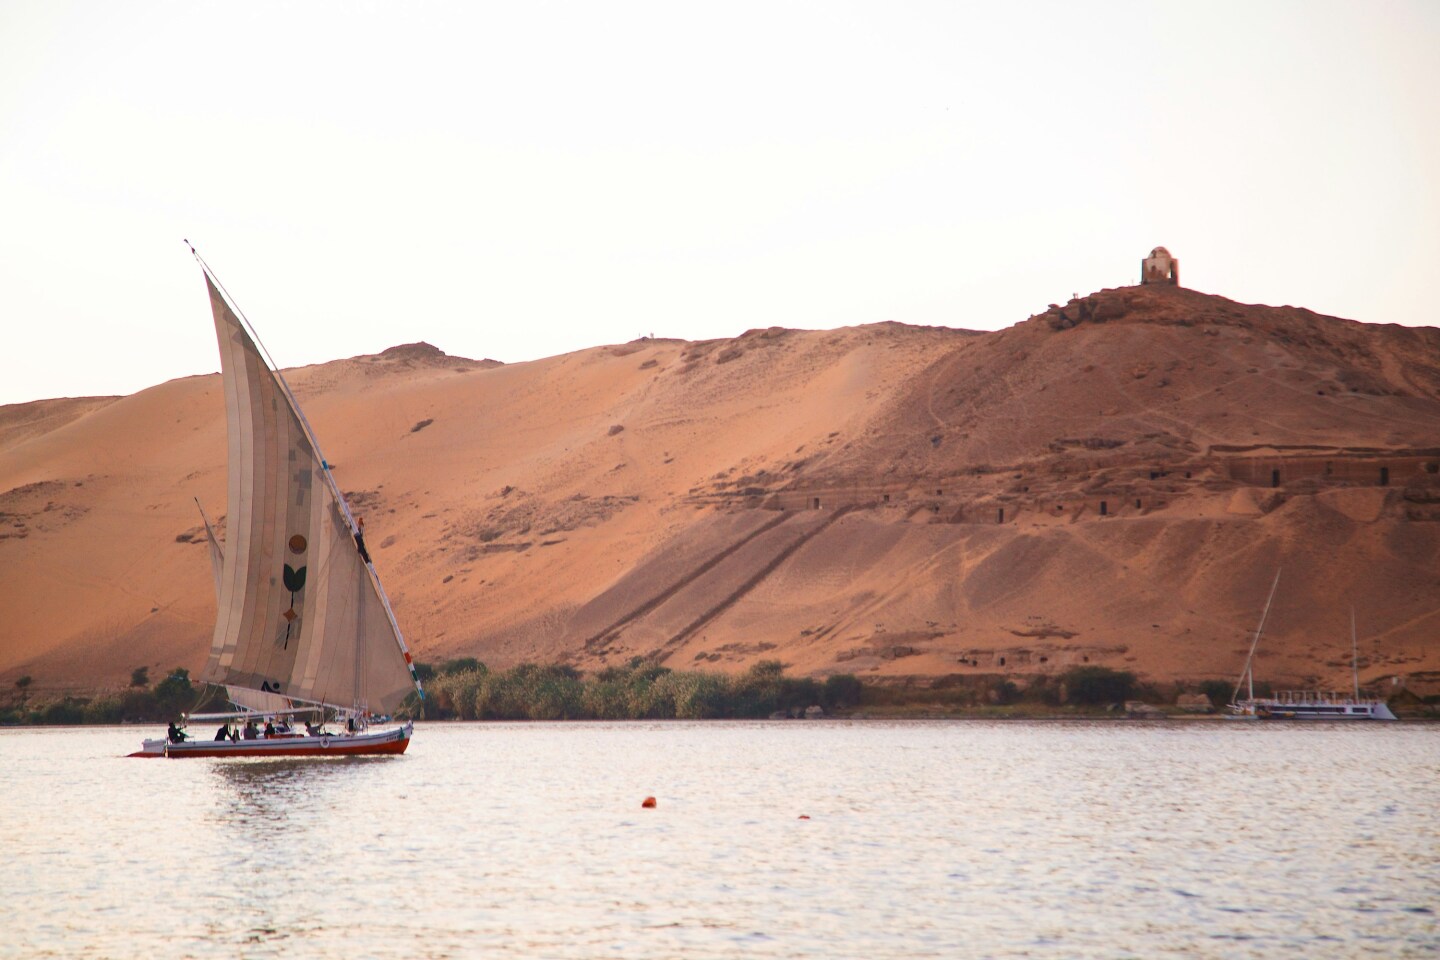 <a>On Lake Nasser, view sweeping desert landscapes en route to one of the most impressive ancient Egyptian sites: Abu Simbel.</a>